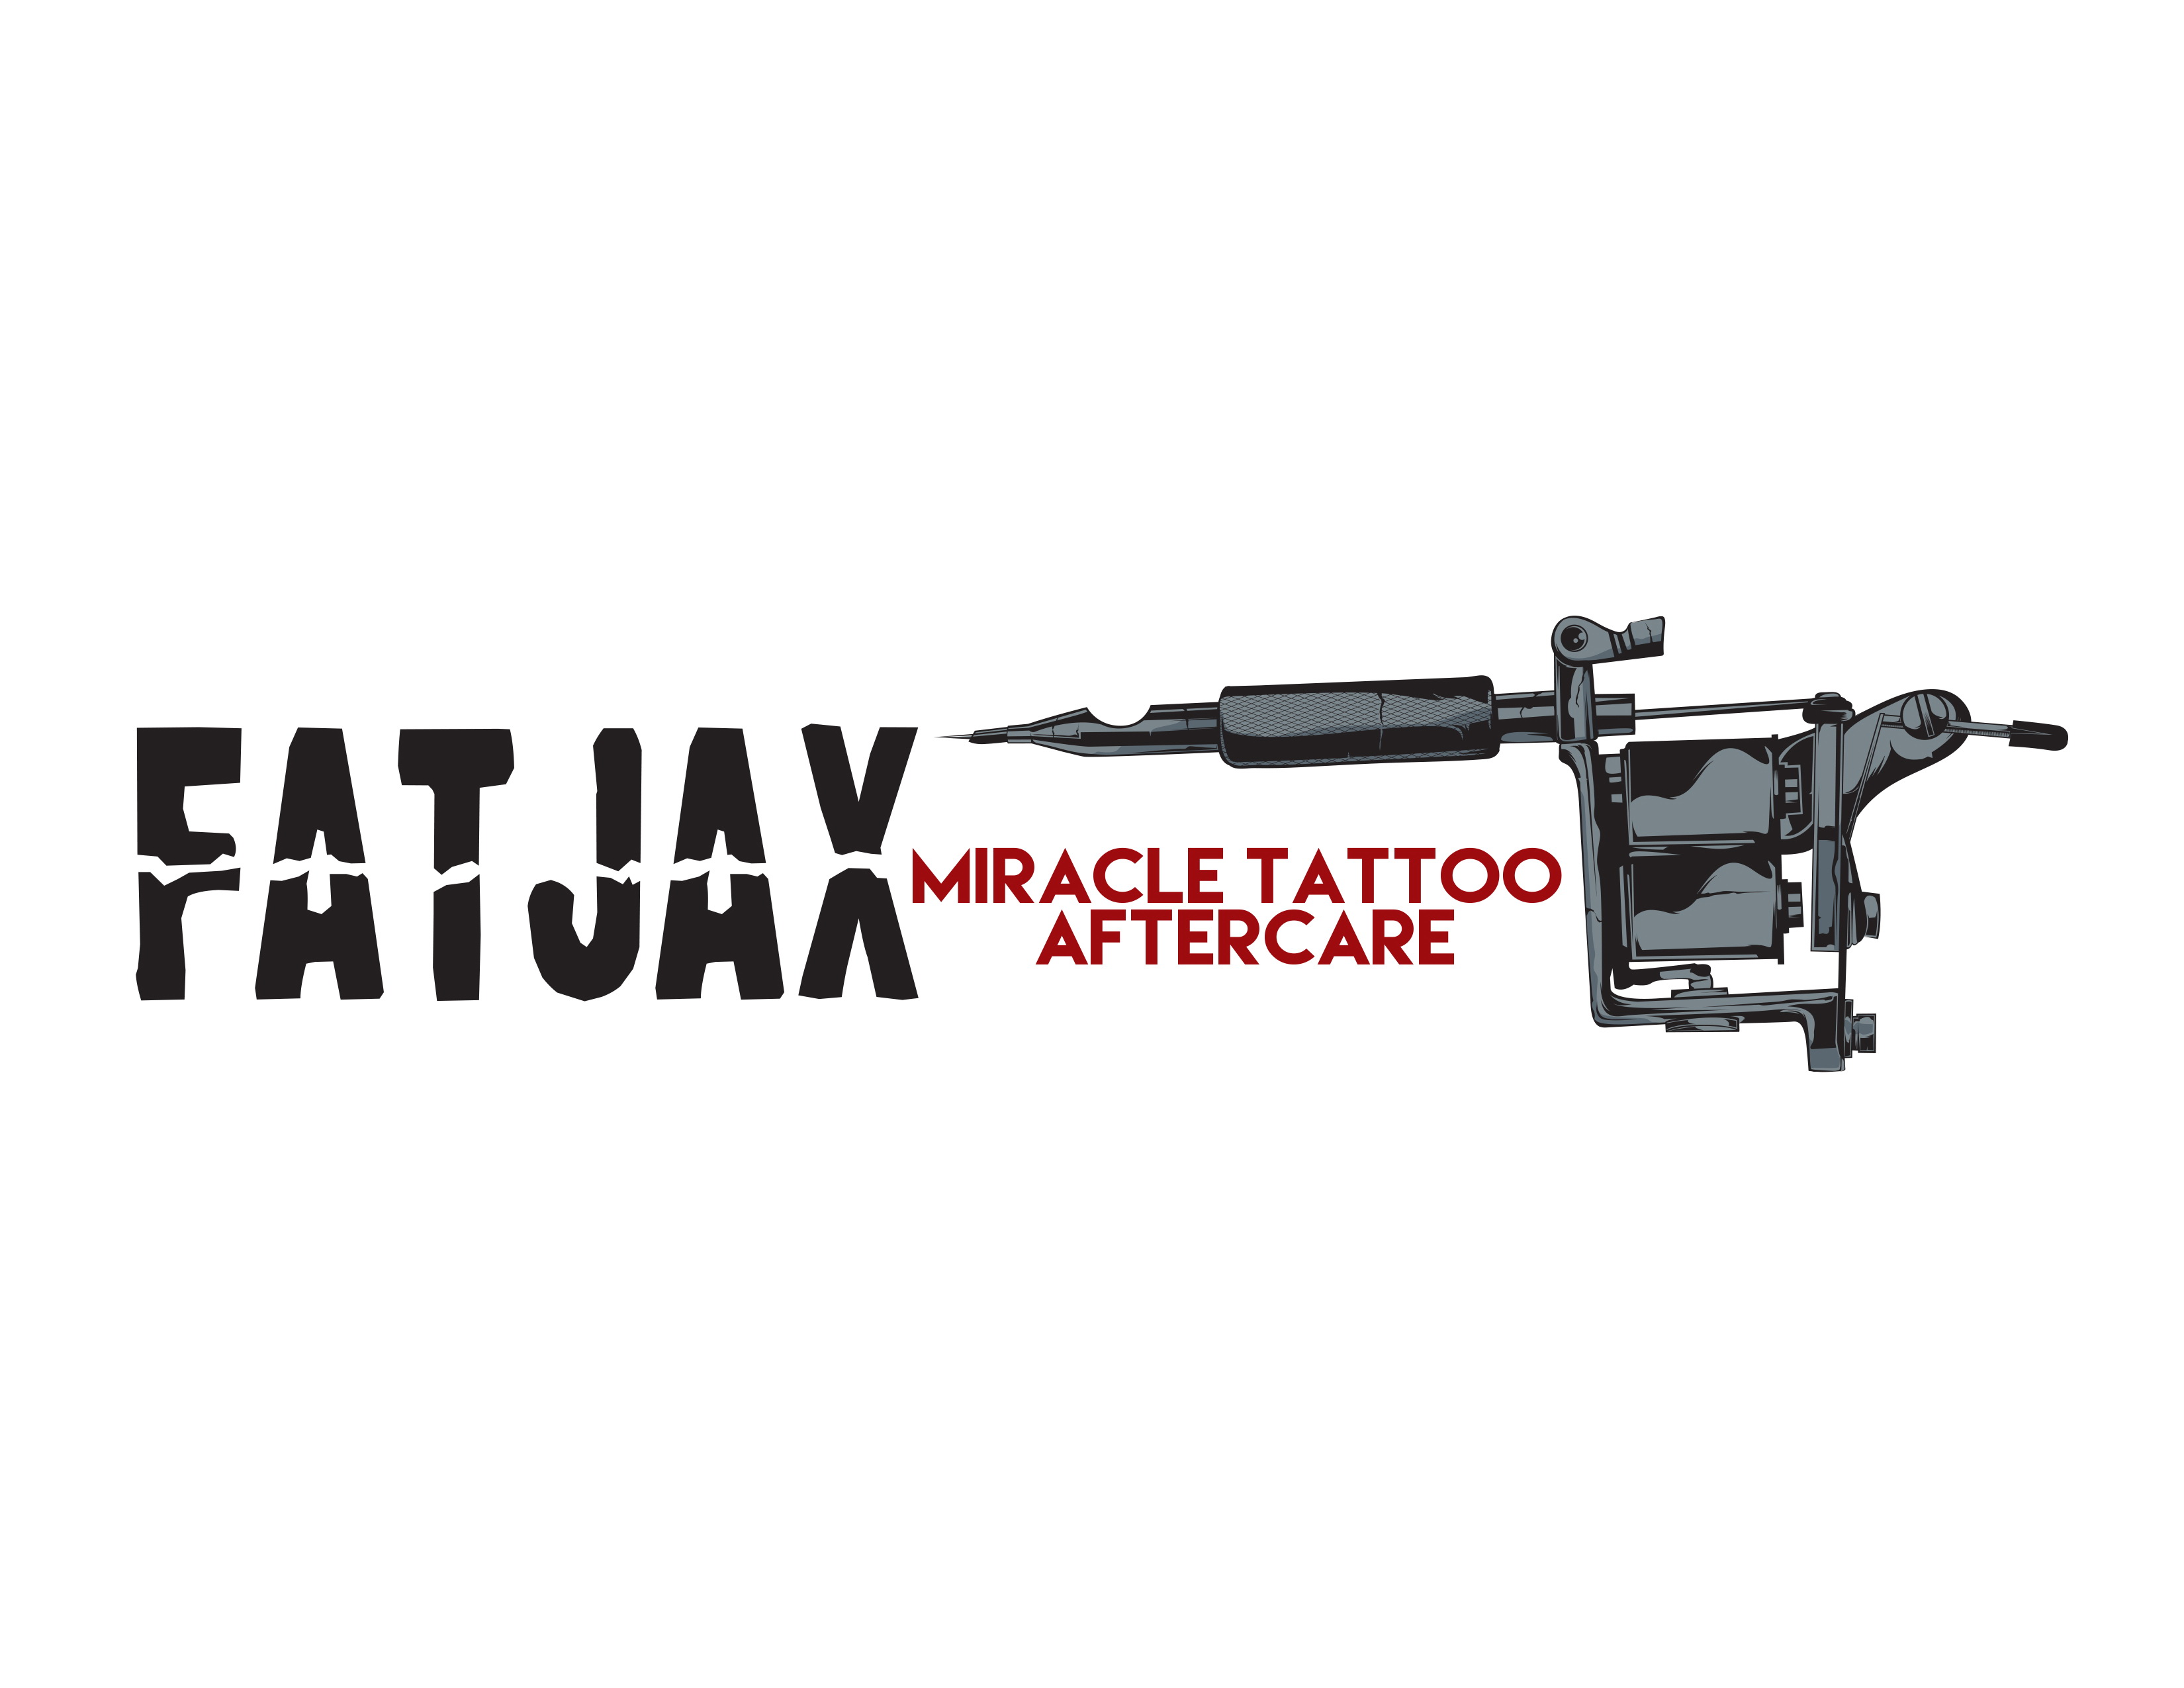 FATJAX is a must for anyone who just got a tattoo.